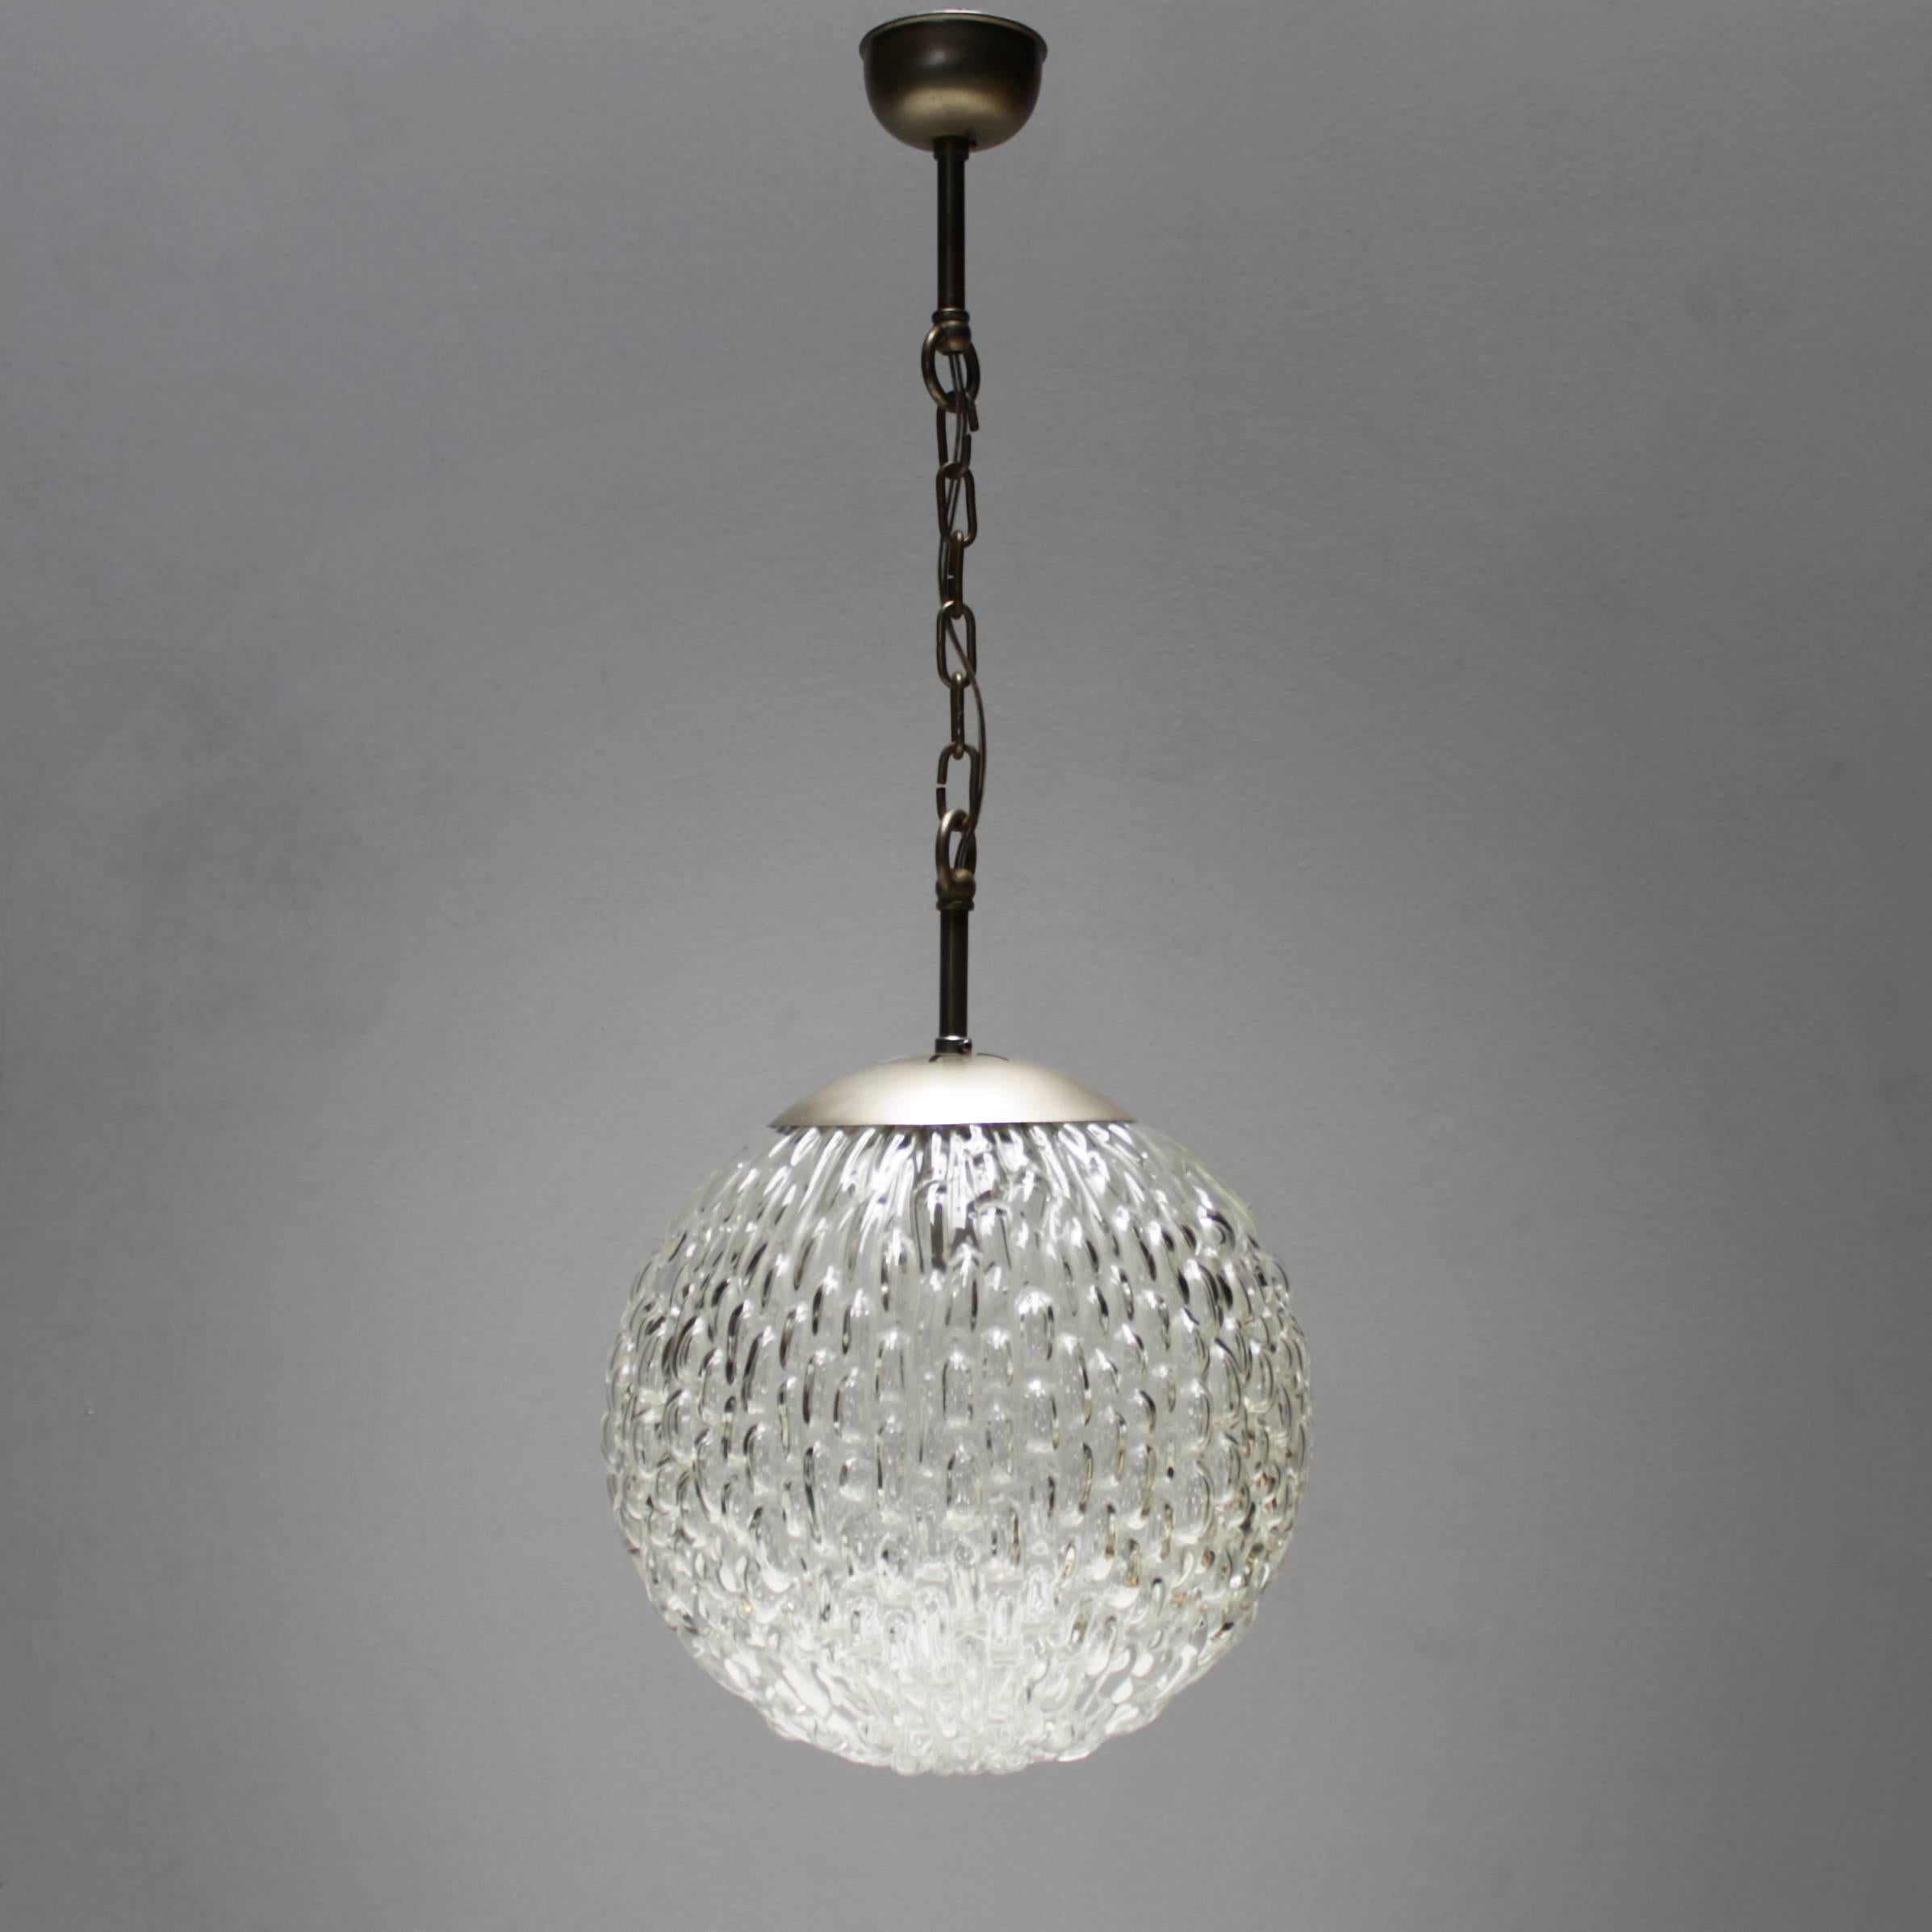 Large molded glass pendant by Doria Leuchten Germany. Beautiful condition. Diameter glass sphere (33 cm). Height from ceiling till drop (80 cm).